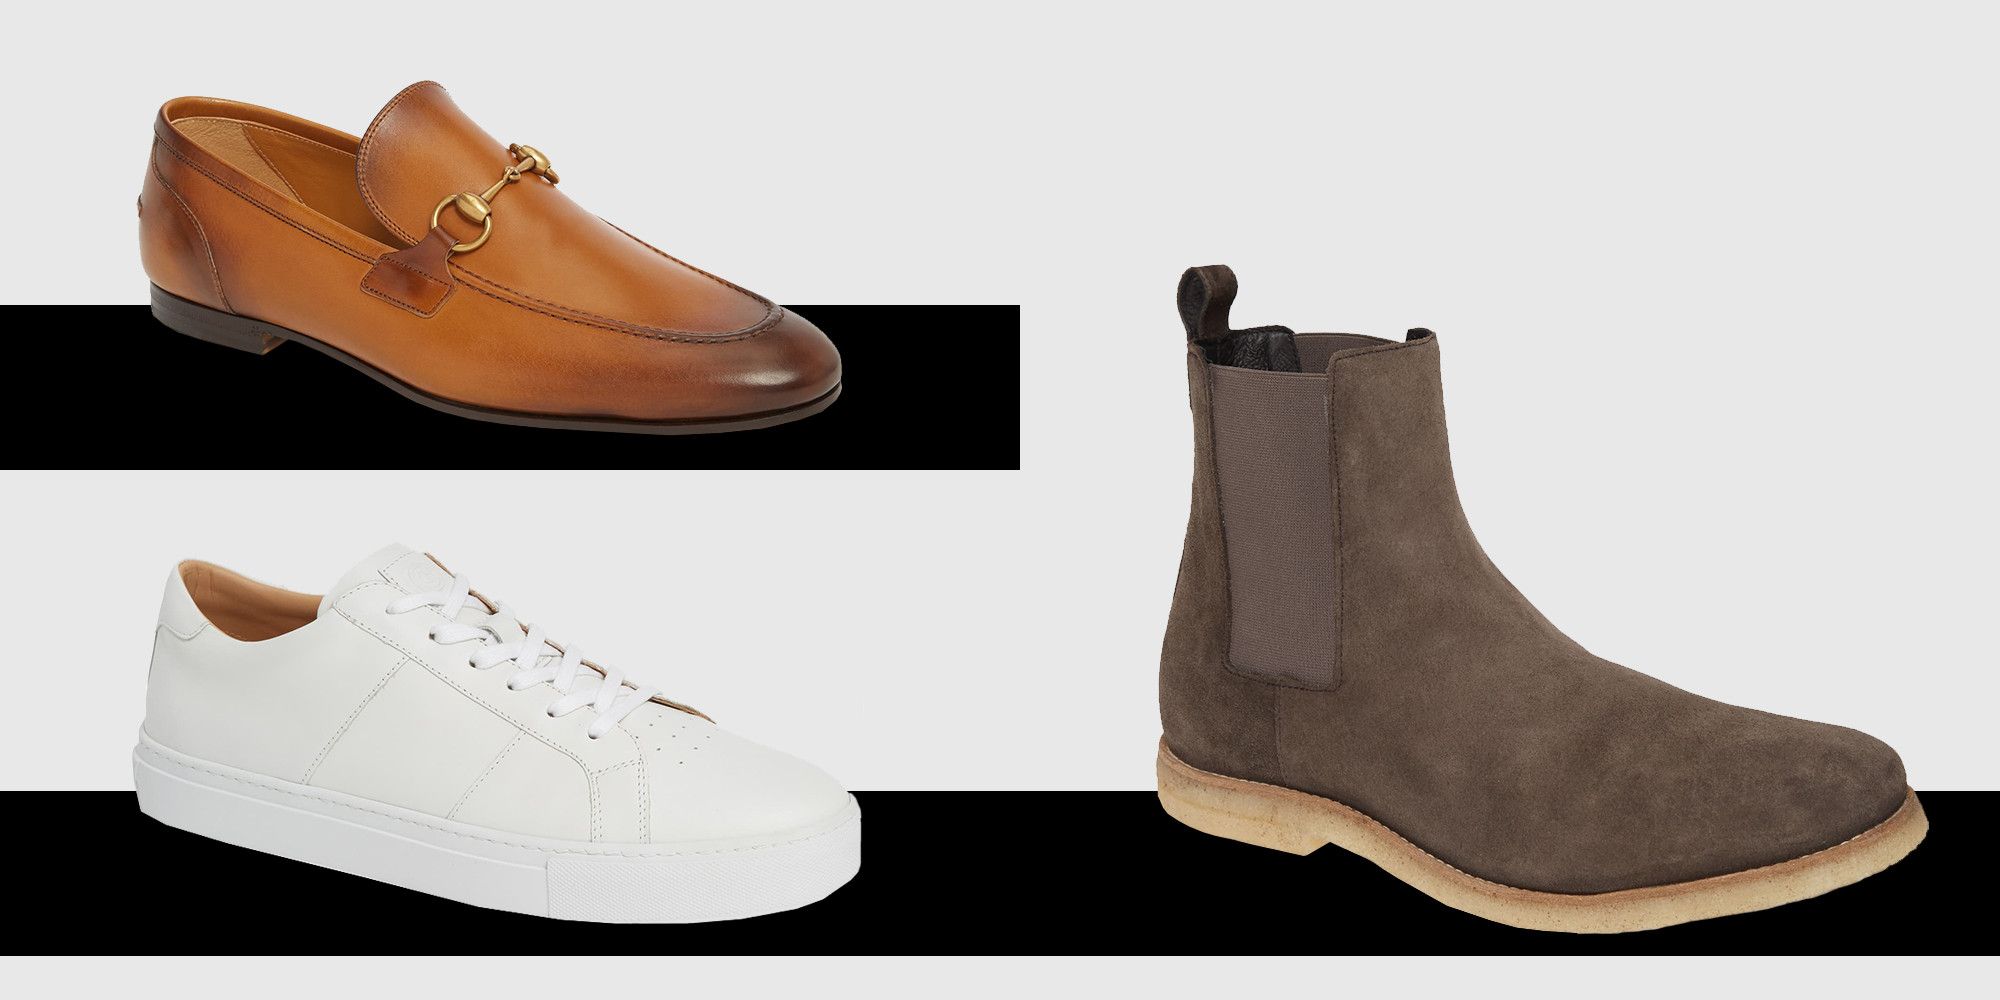 shoes that are business casual